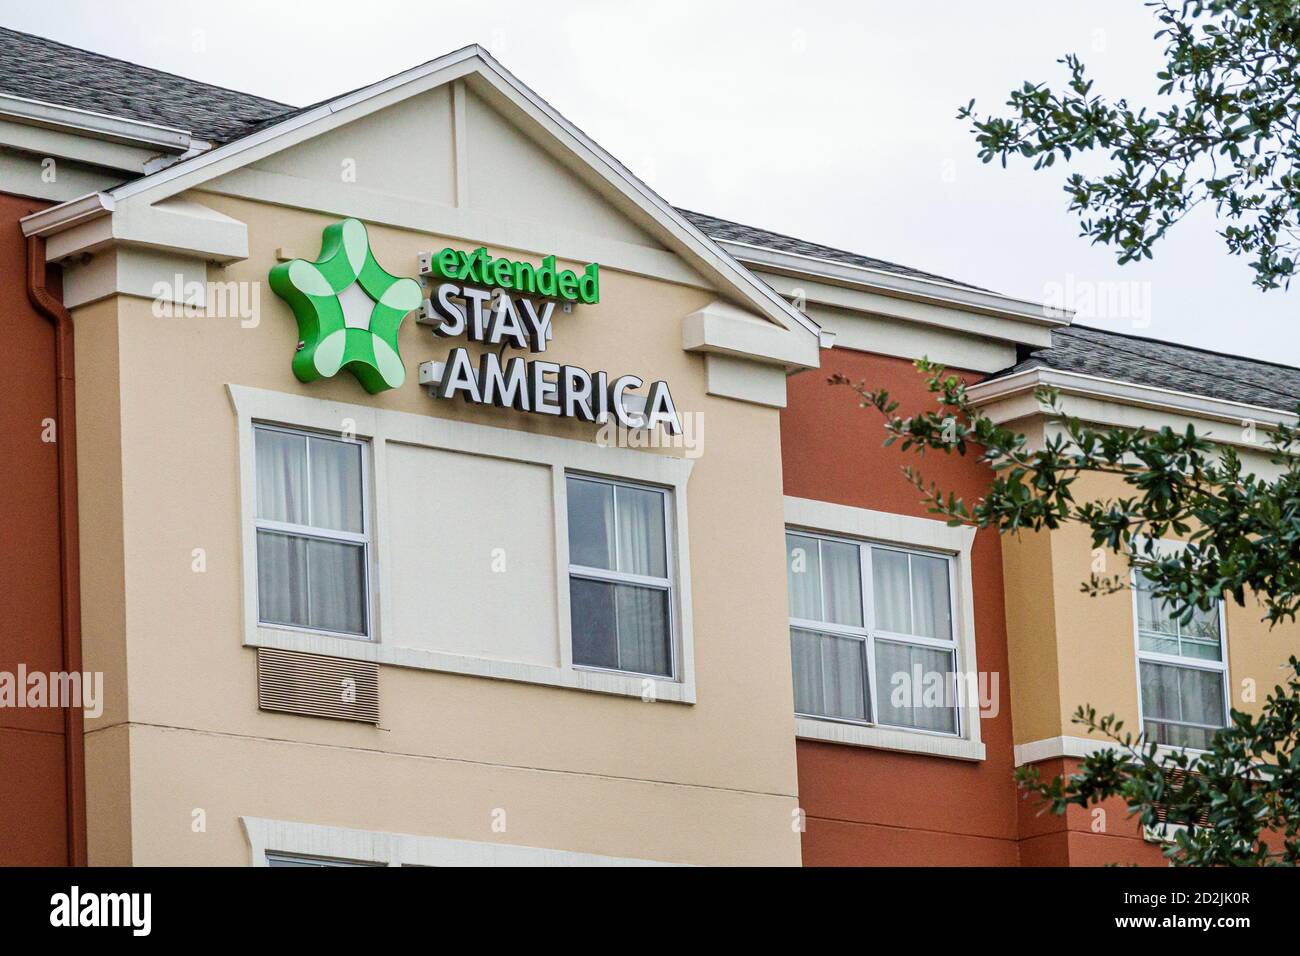 Orlando Florida,Extended Stay America,hotel lodging inn motel building outside exterior sign, Stock Photo